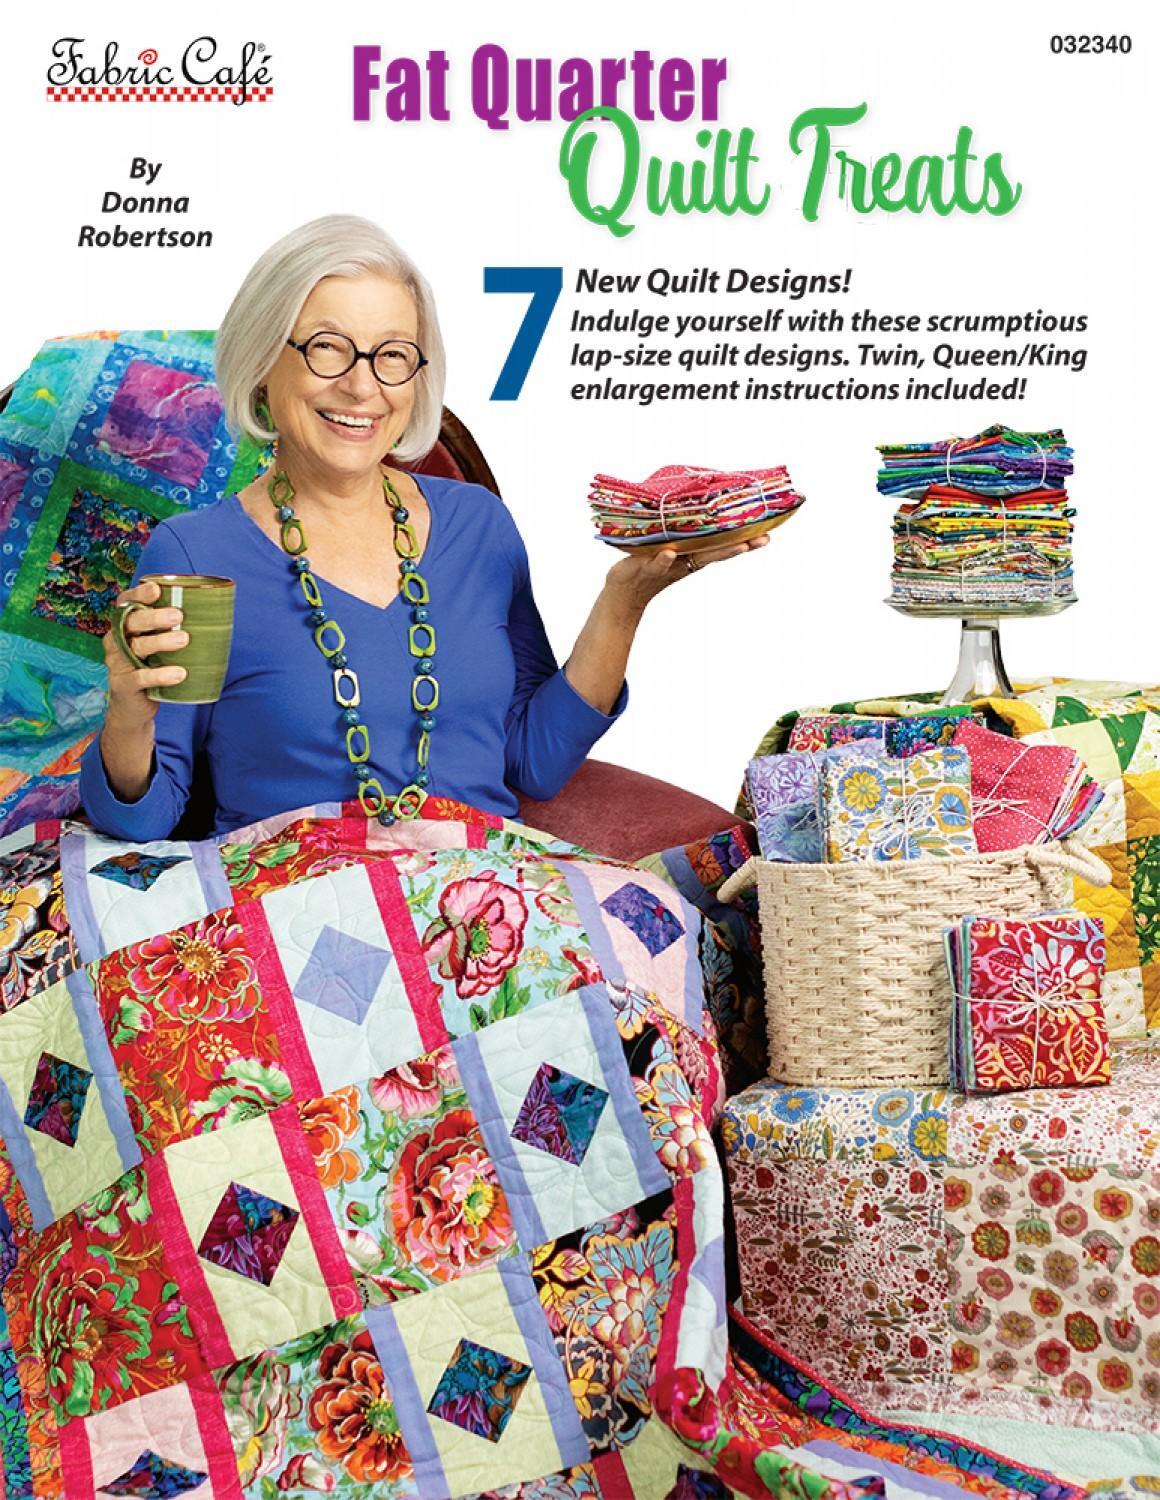 New!! One Block 3 Yard Quilts Book by Donna and Fran for Fabric